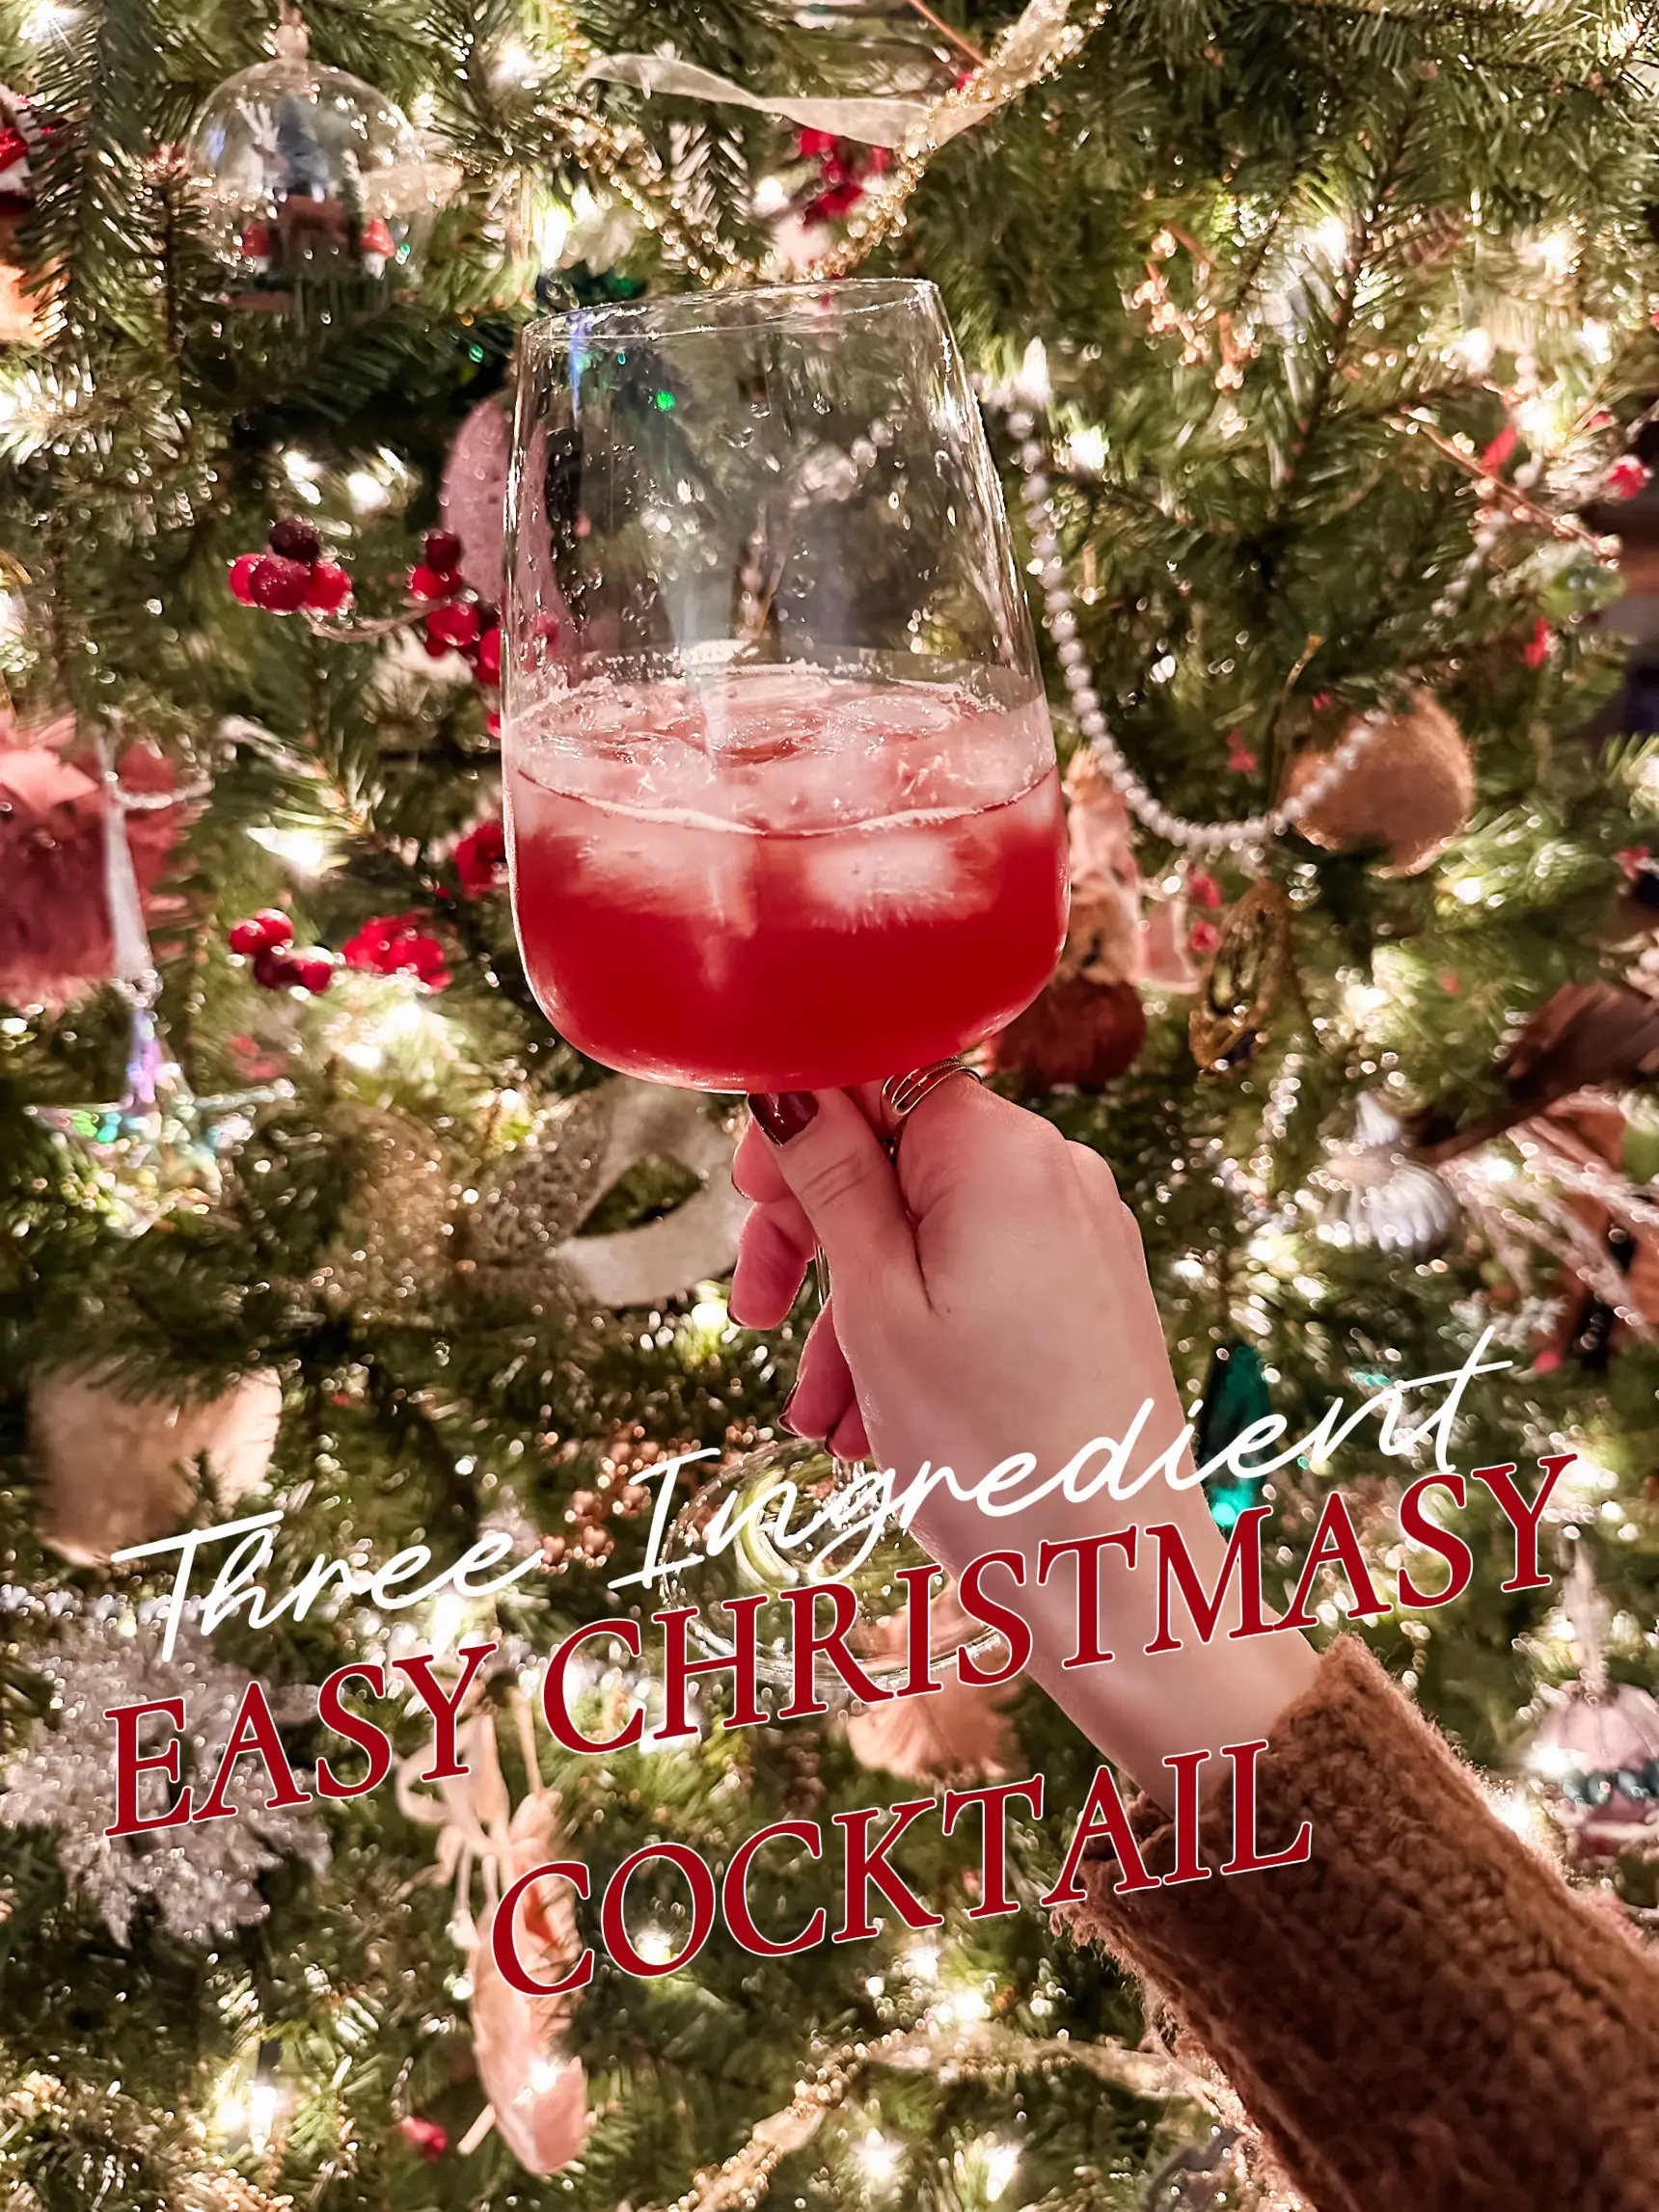 EASY CHRISTMASY COCKTAIL's images